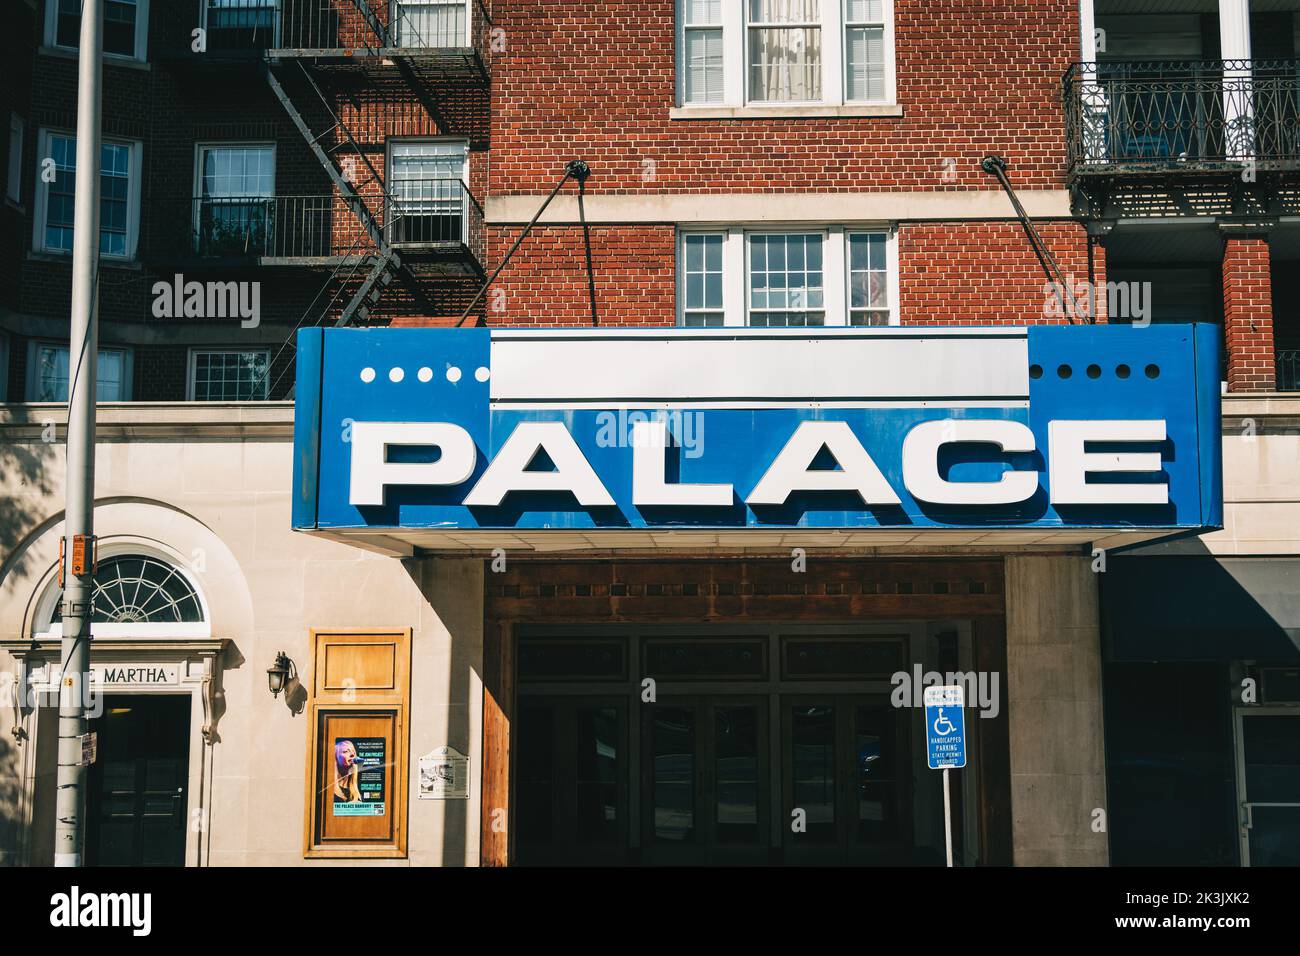 The Palace Theater vintage sign, Danbury, Connecticut Stock Photo